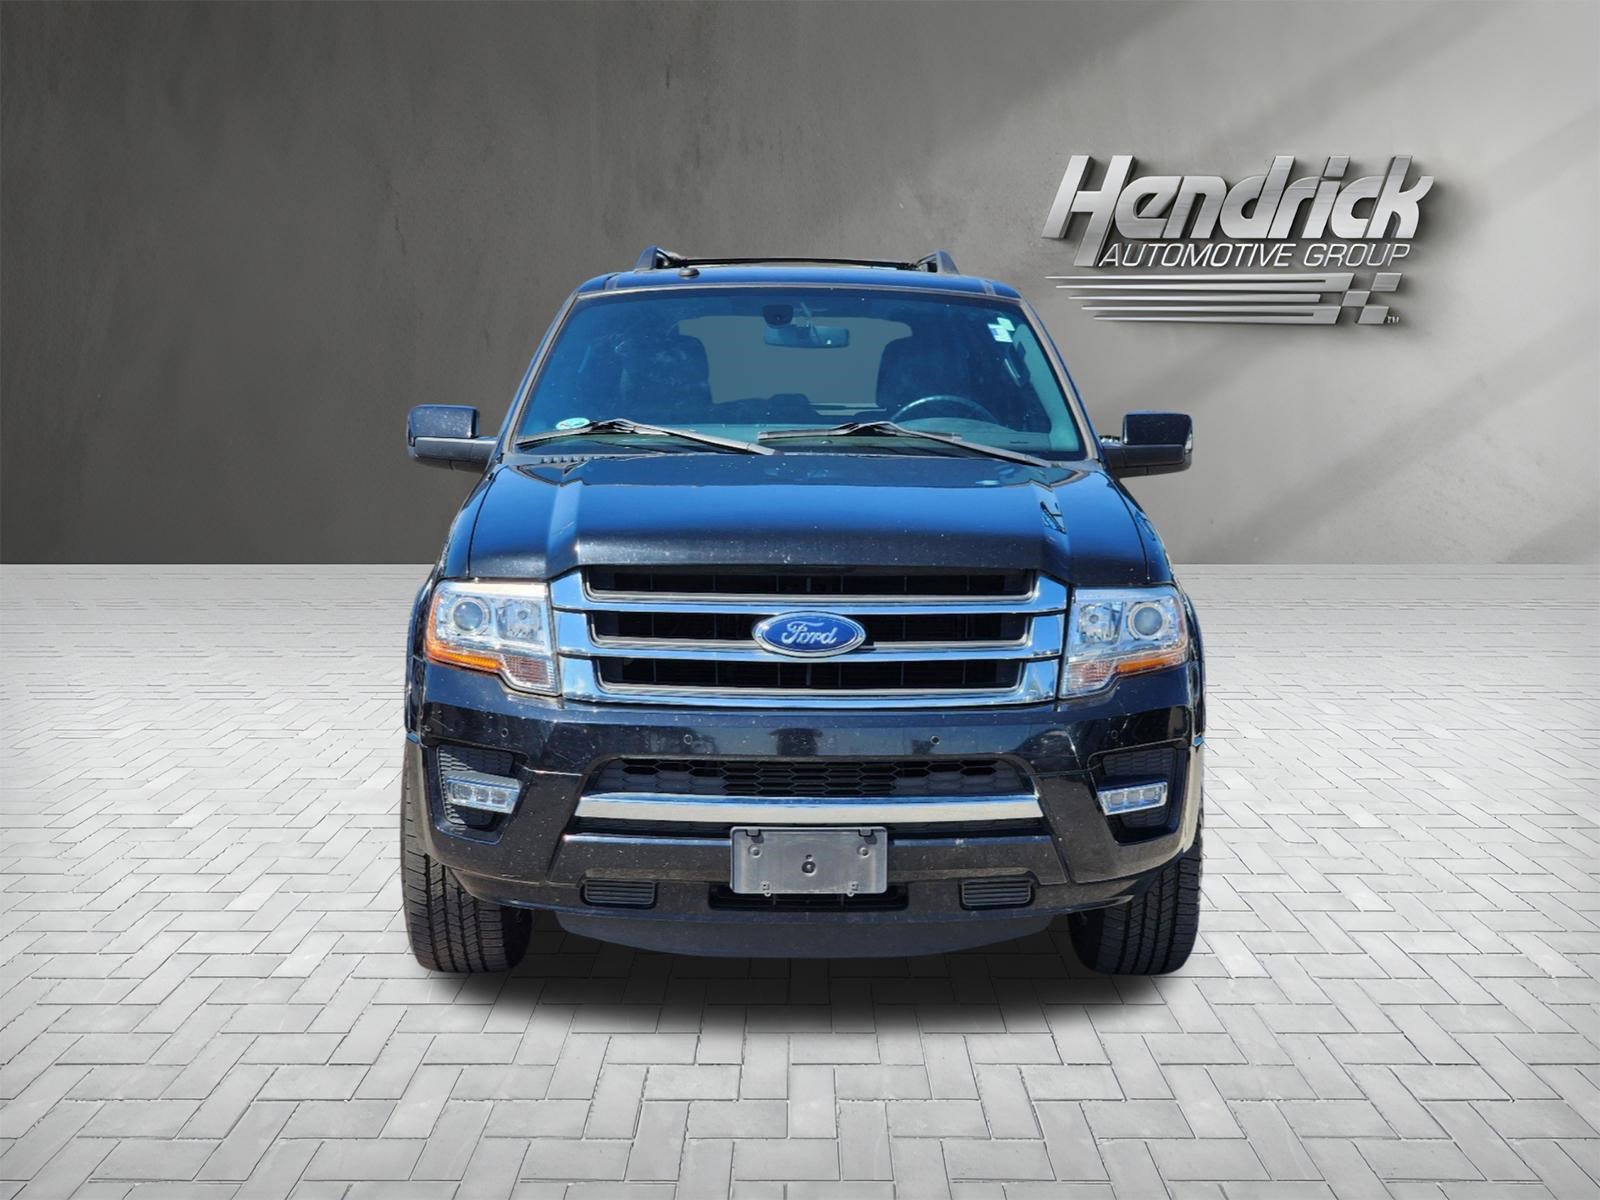 Pre-Owned 2017 Ford Expedition EL Limited SUV in Merriam #Q18452A |  Hendrick Chevrolet Shawnee Mission